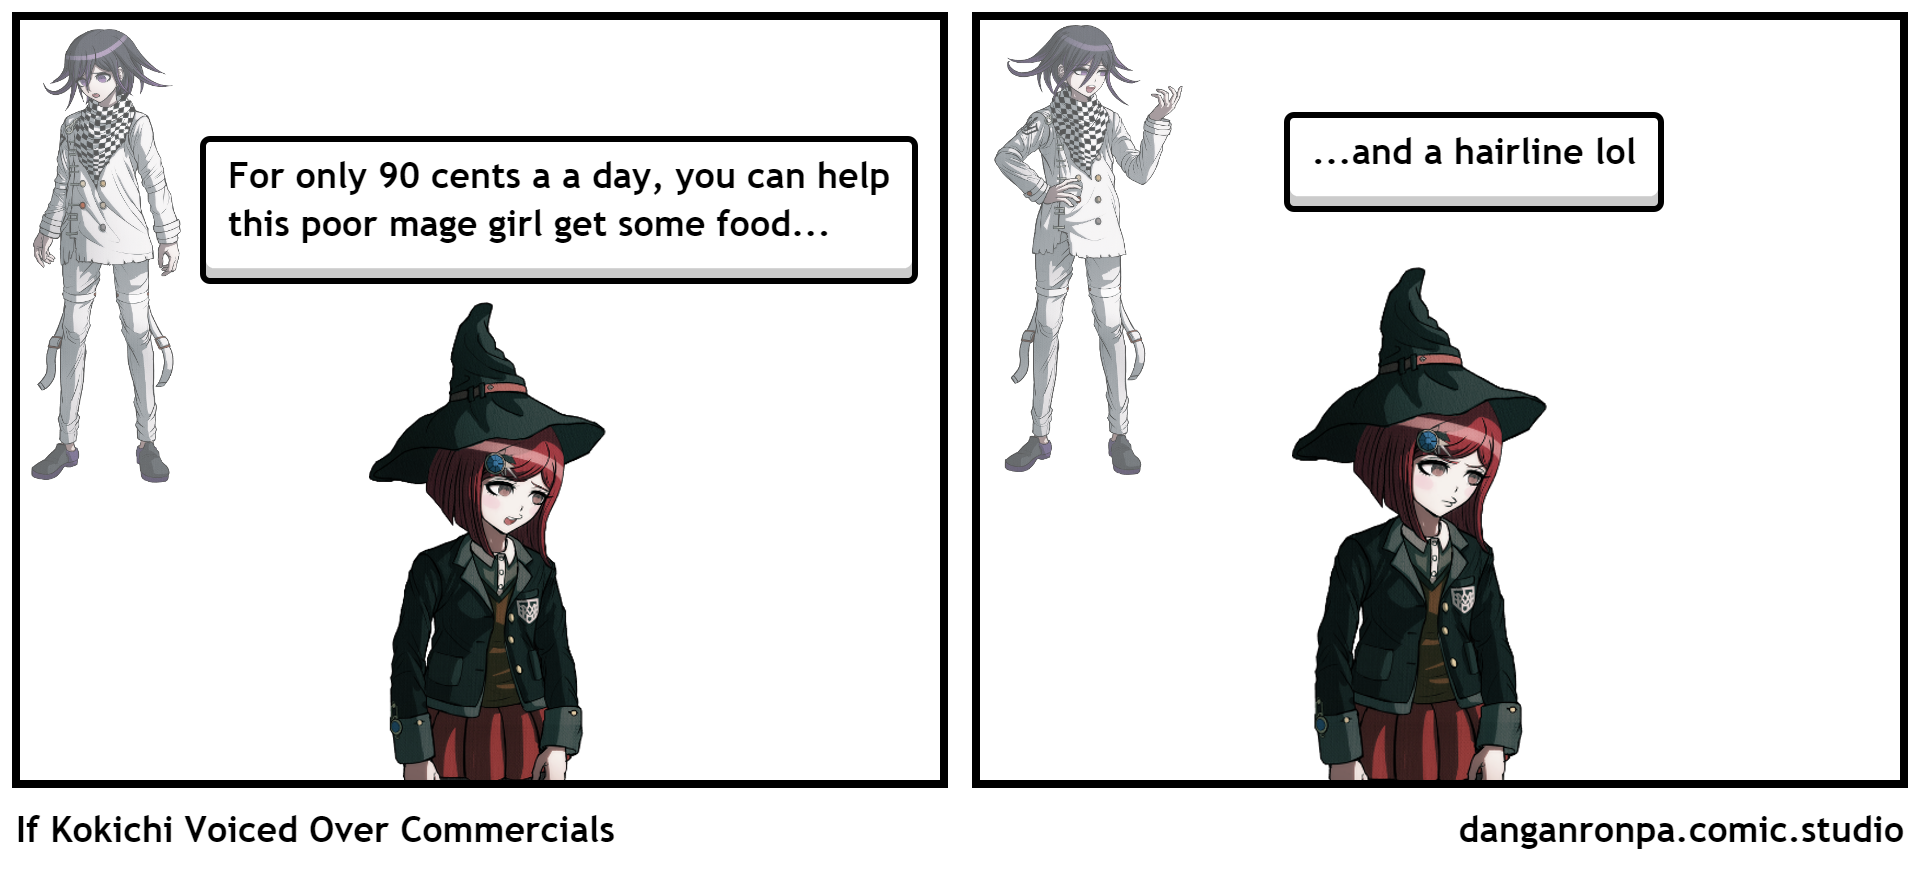 If Kokichi Voiced Over Commercials